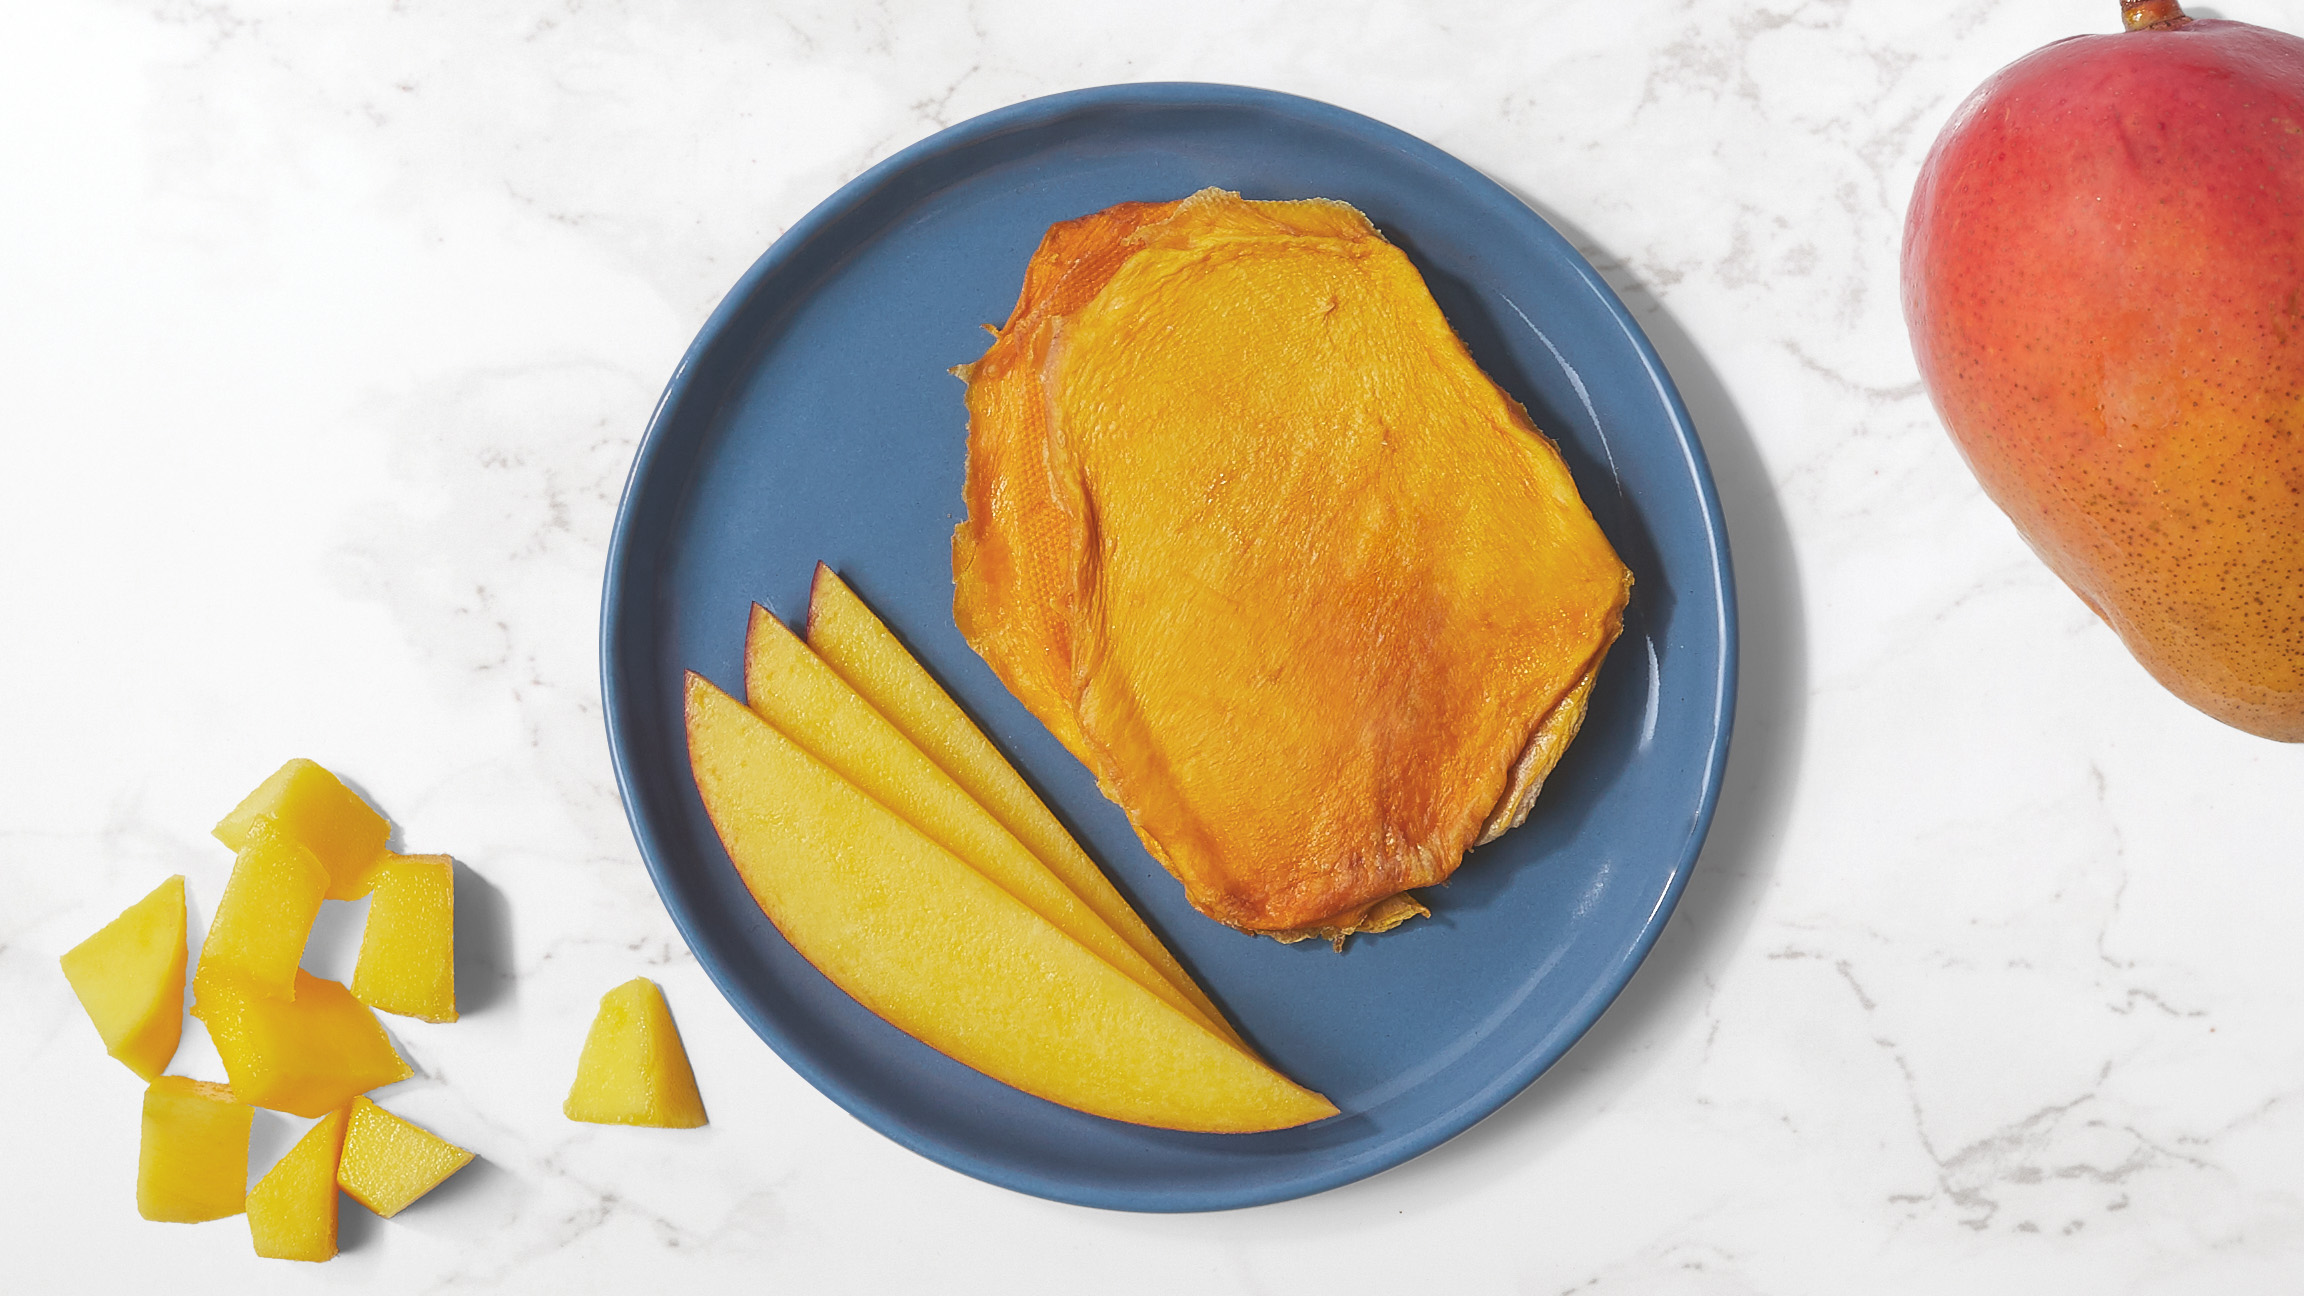 Dried and fresh mango slices on a blue plate with fresh pieces of mango and a whole mango on a white marble counter top